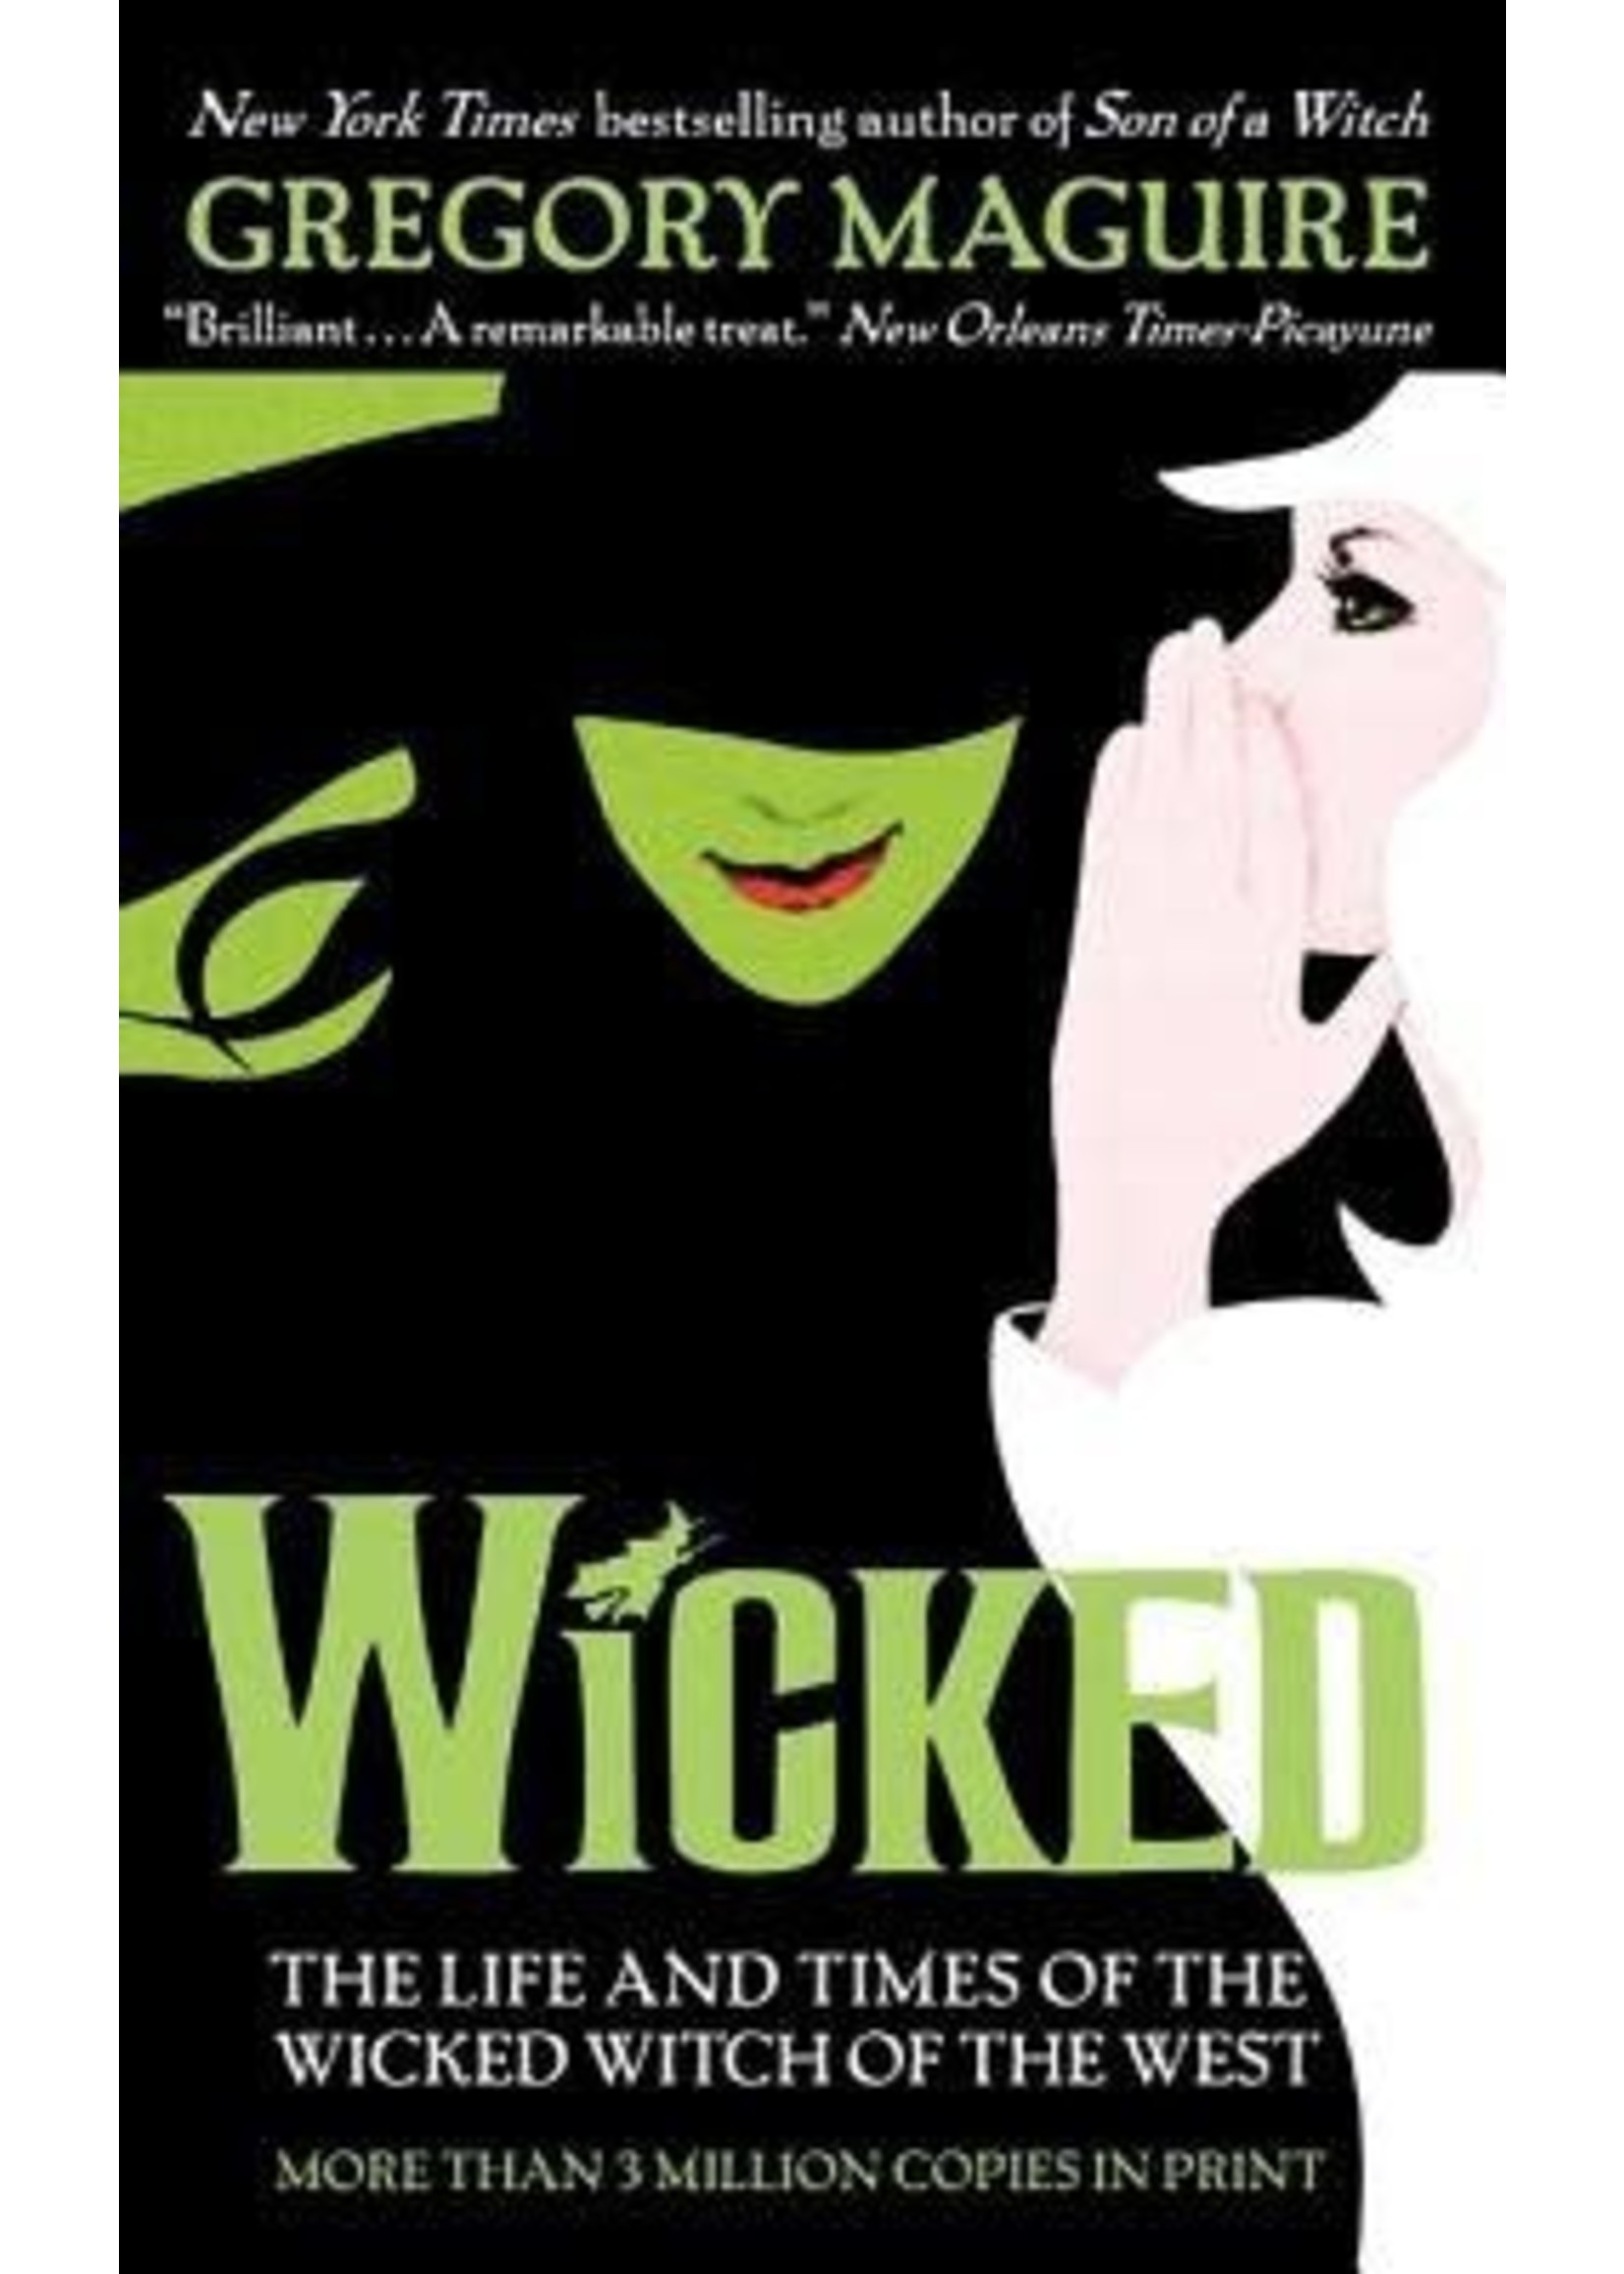 Wicked: The Life and Times of the Wicked Witch of the West (The Wicked Years #1) by Gregory Maguire